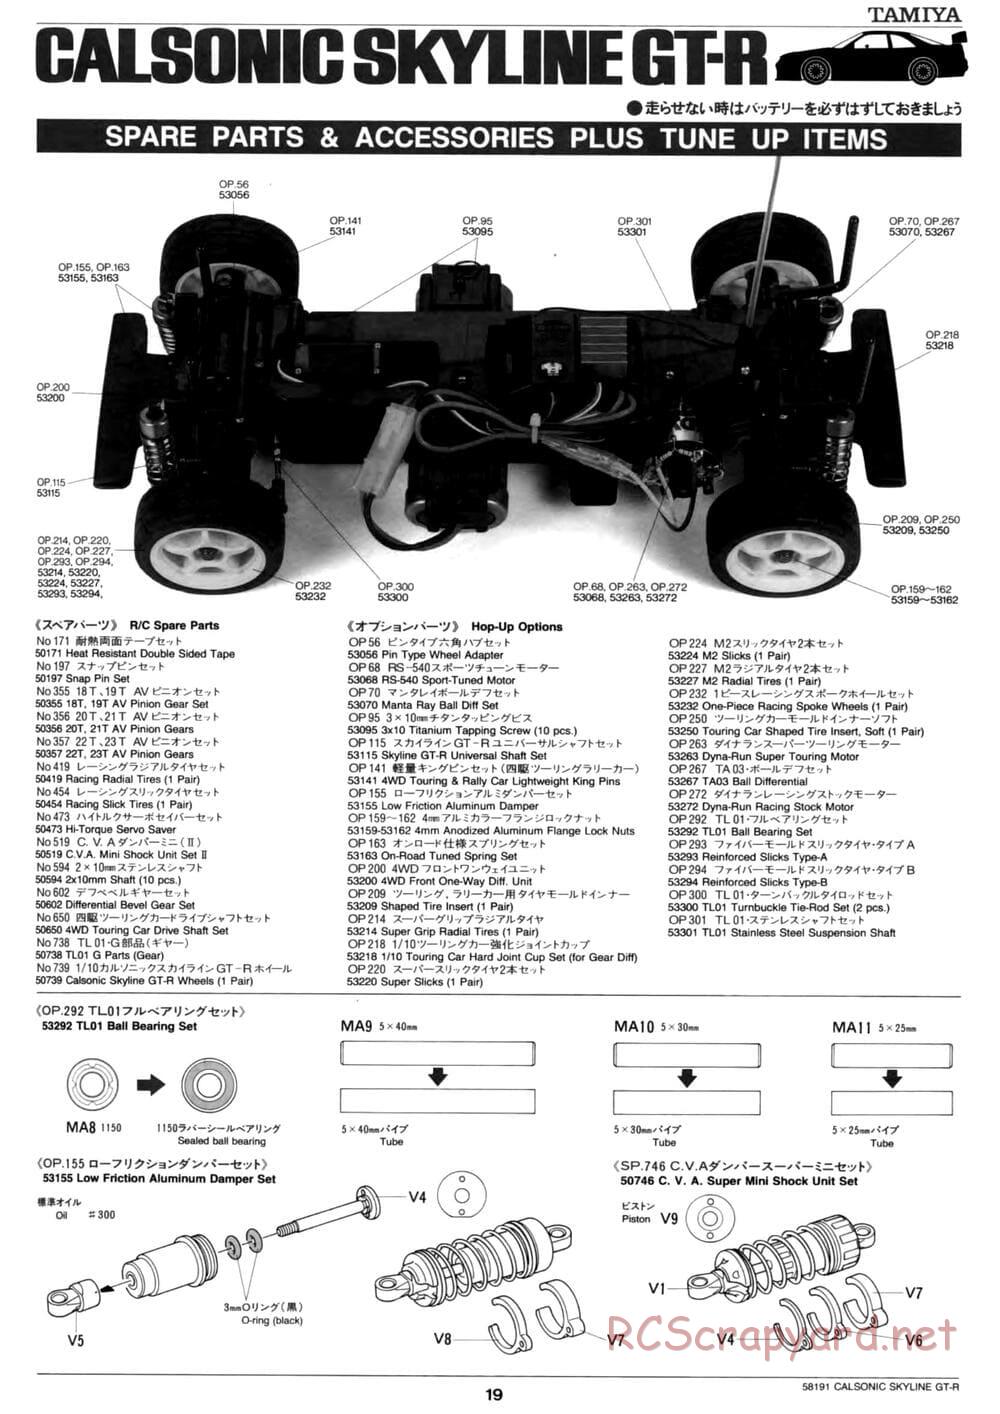 Tamiya - Calsonic Skyline GT-R - TL-01 Chassis - Manual - Page 19